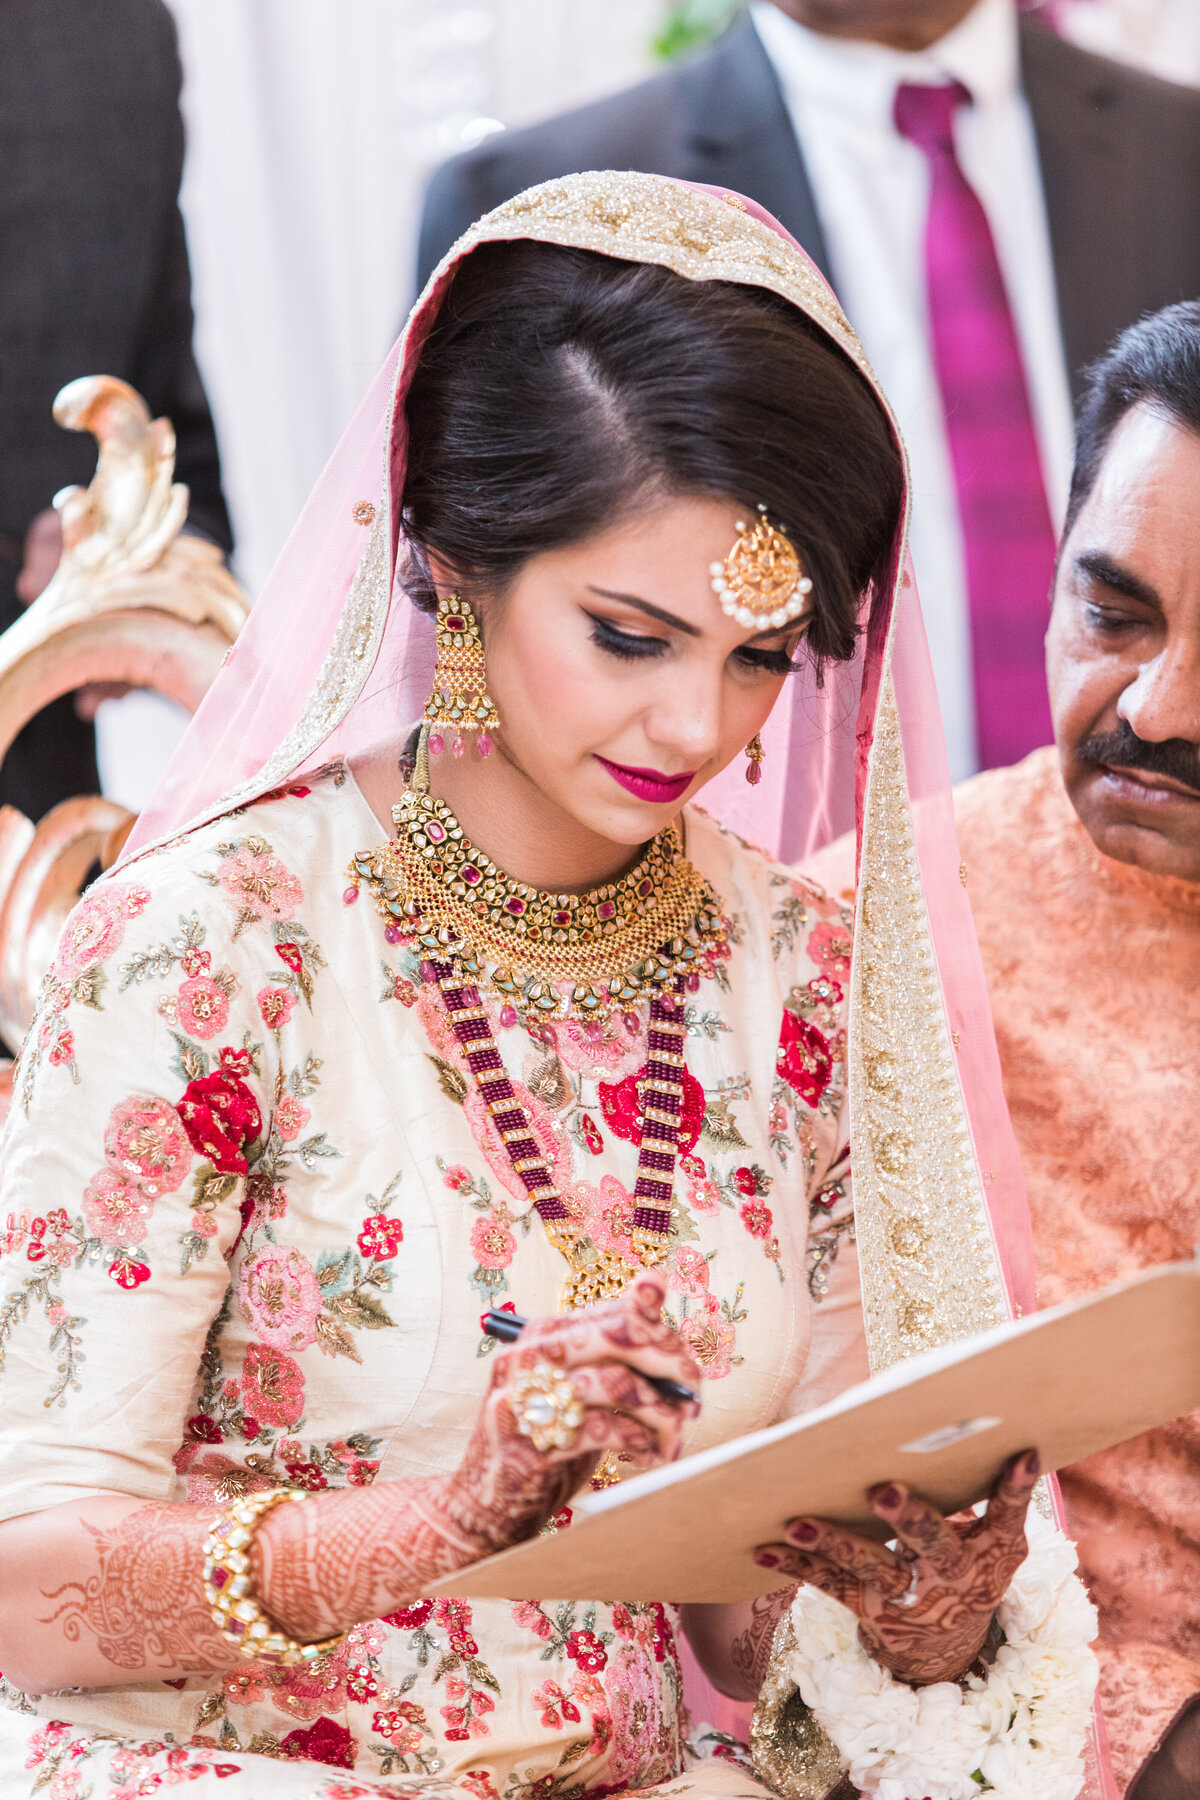 maha_studios_wedding_photography_chicago_new_york_california_sophisticated_and_vibrant_photography_honoring_modern_south_asian_and_multicultural_weddings29